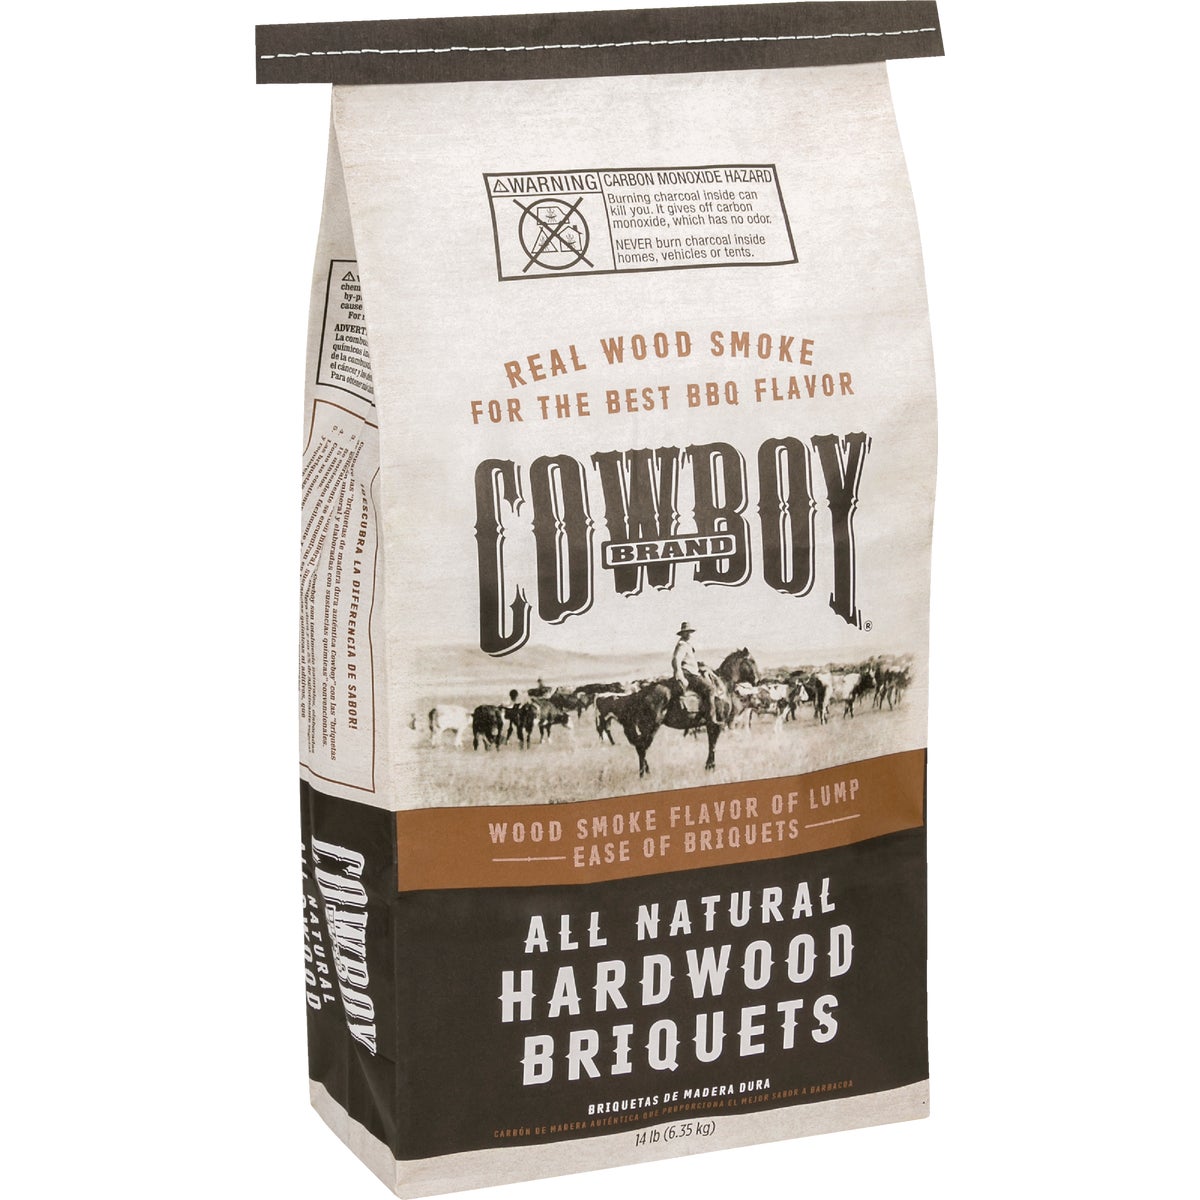 Item 816477, Cowboy all natural charcoal briquets are made up of 95% hardwood charcoal 